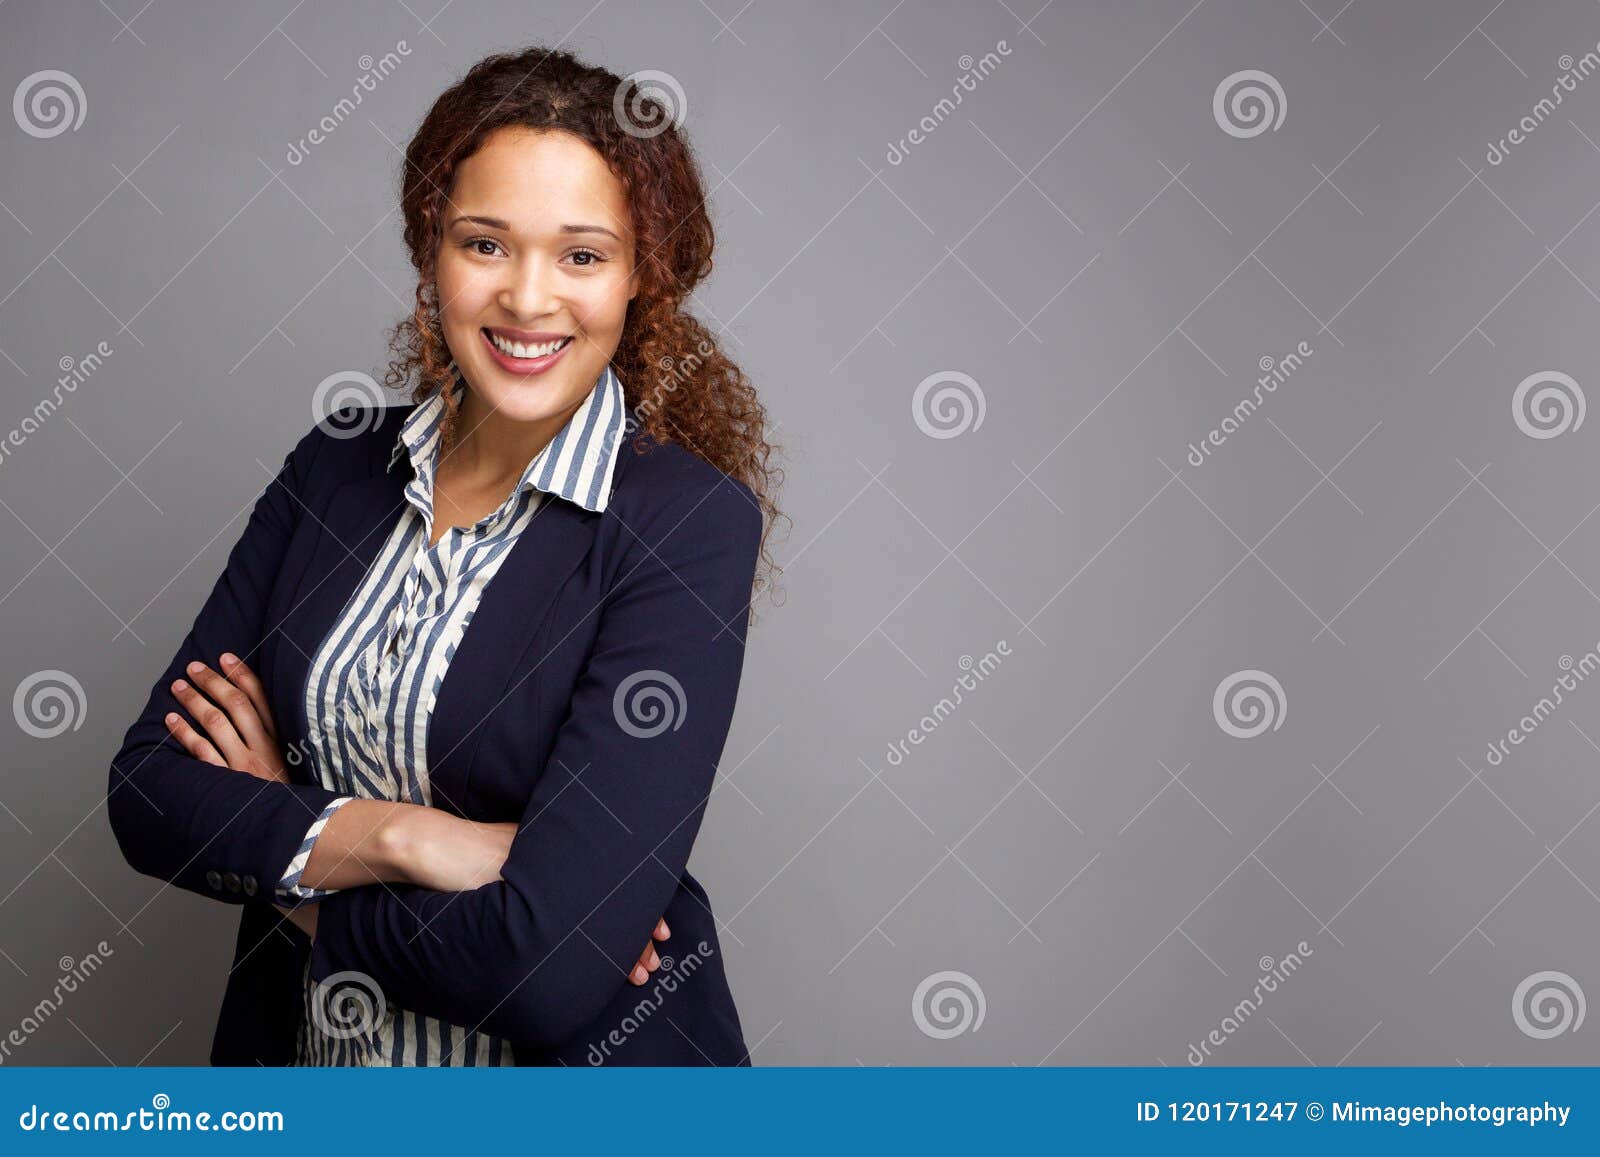 confident young business woman smiling abasing gray background